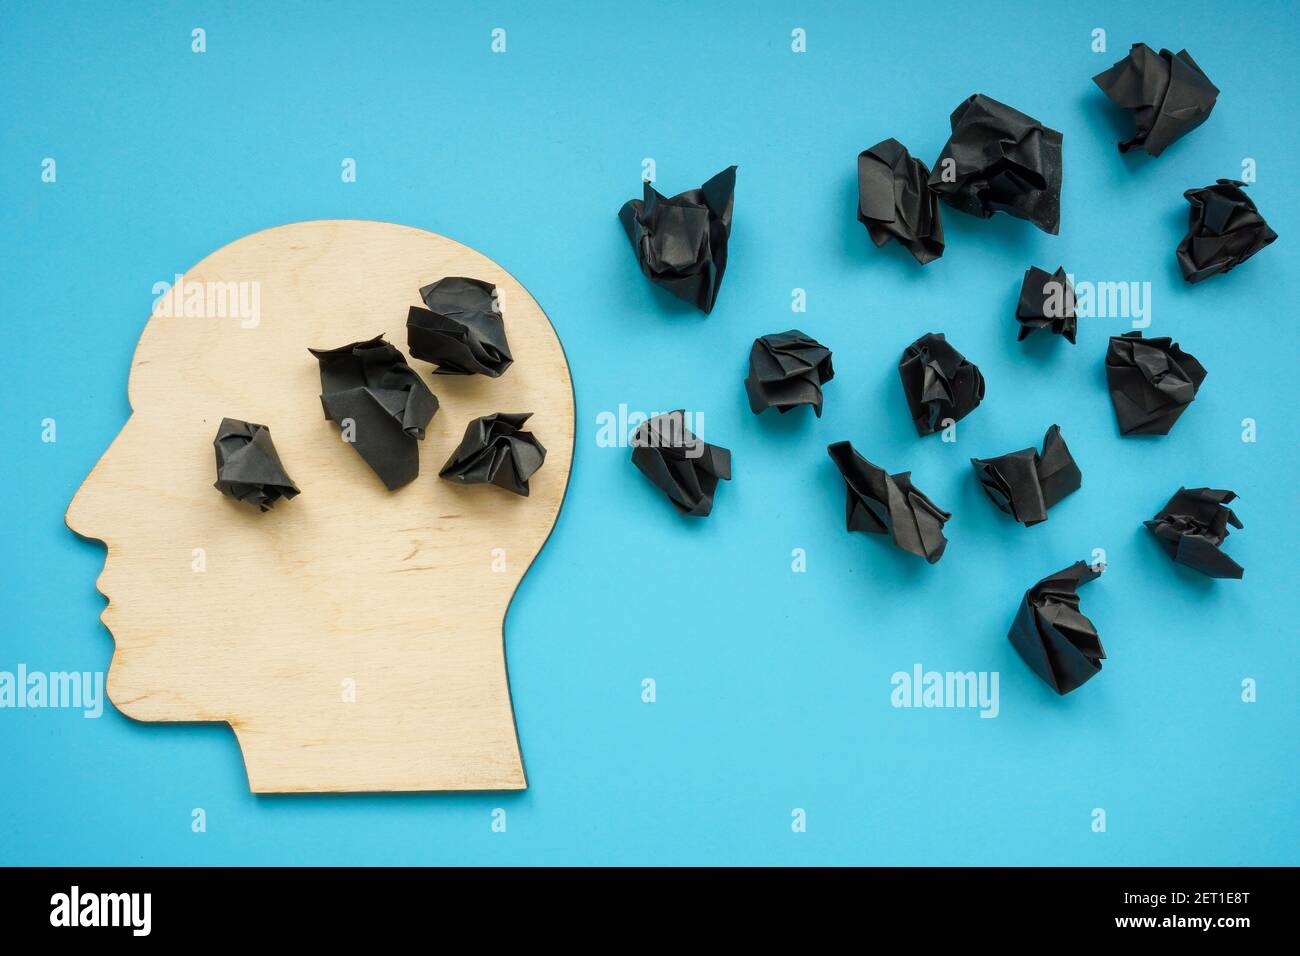 Head shape with black paper balls as symbol of depression and negative thoughts. Stock Photo